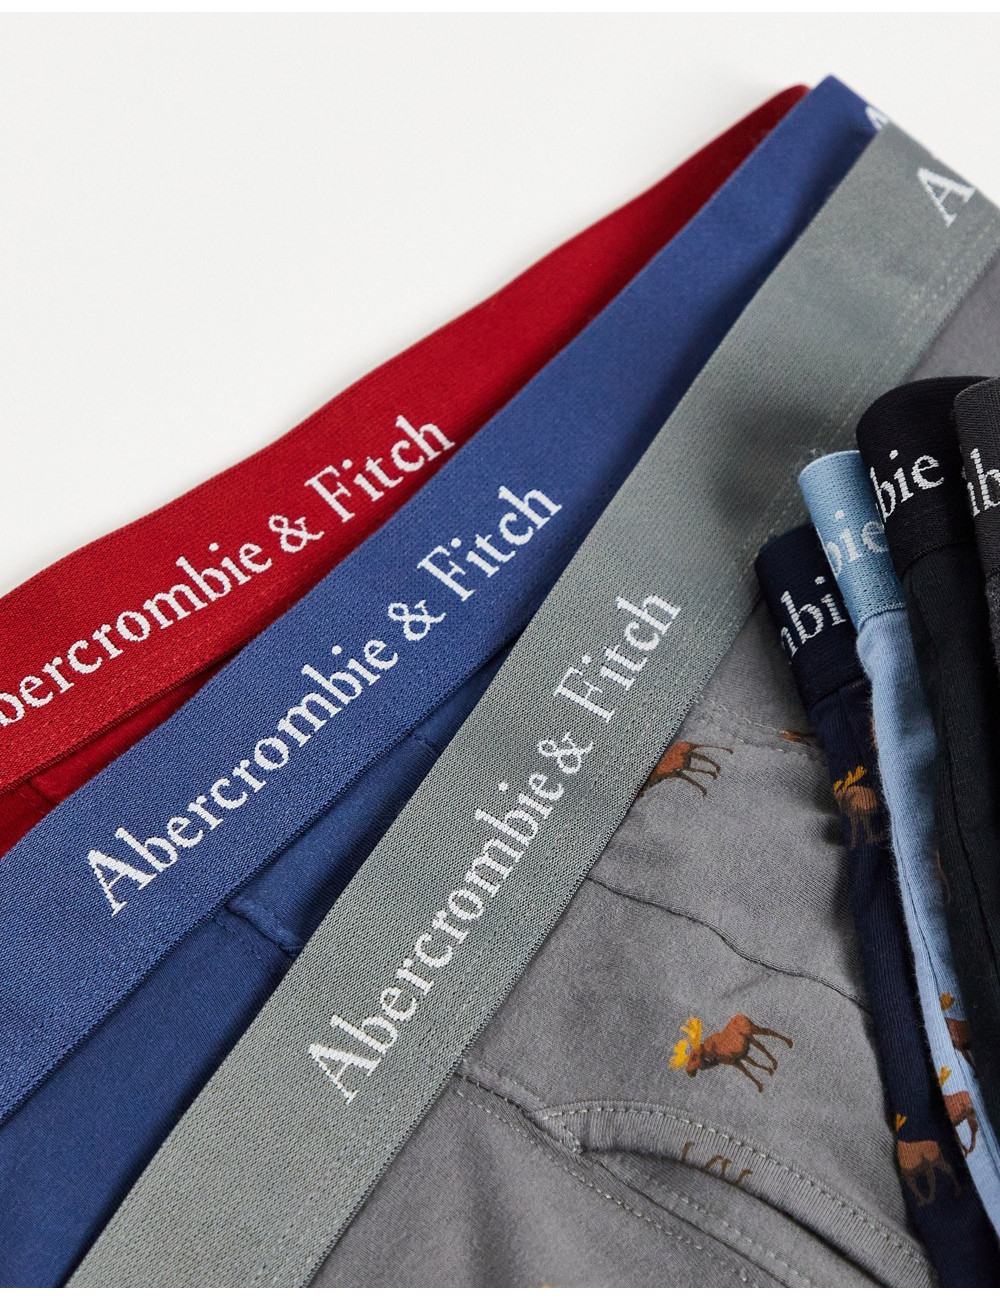 Abercrombie & Fitch 7 pack...